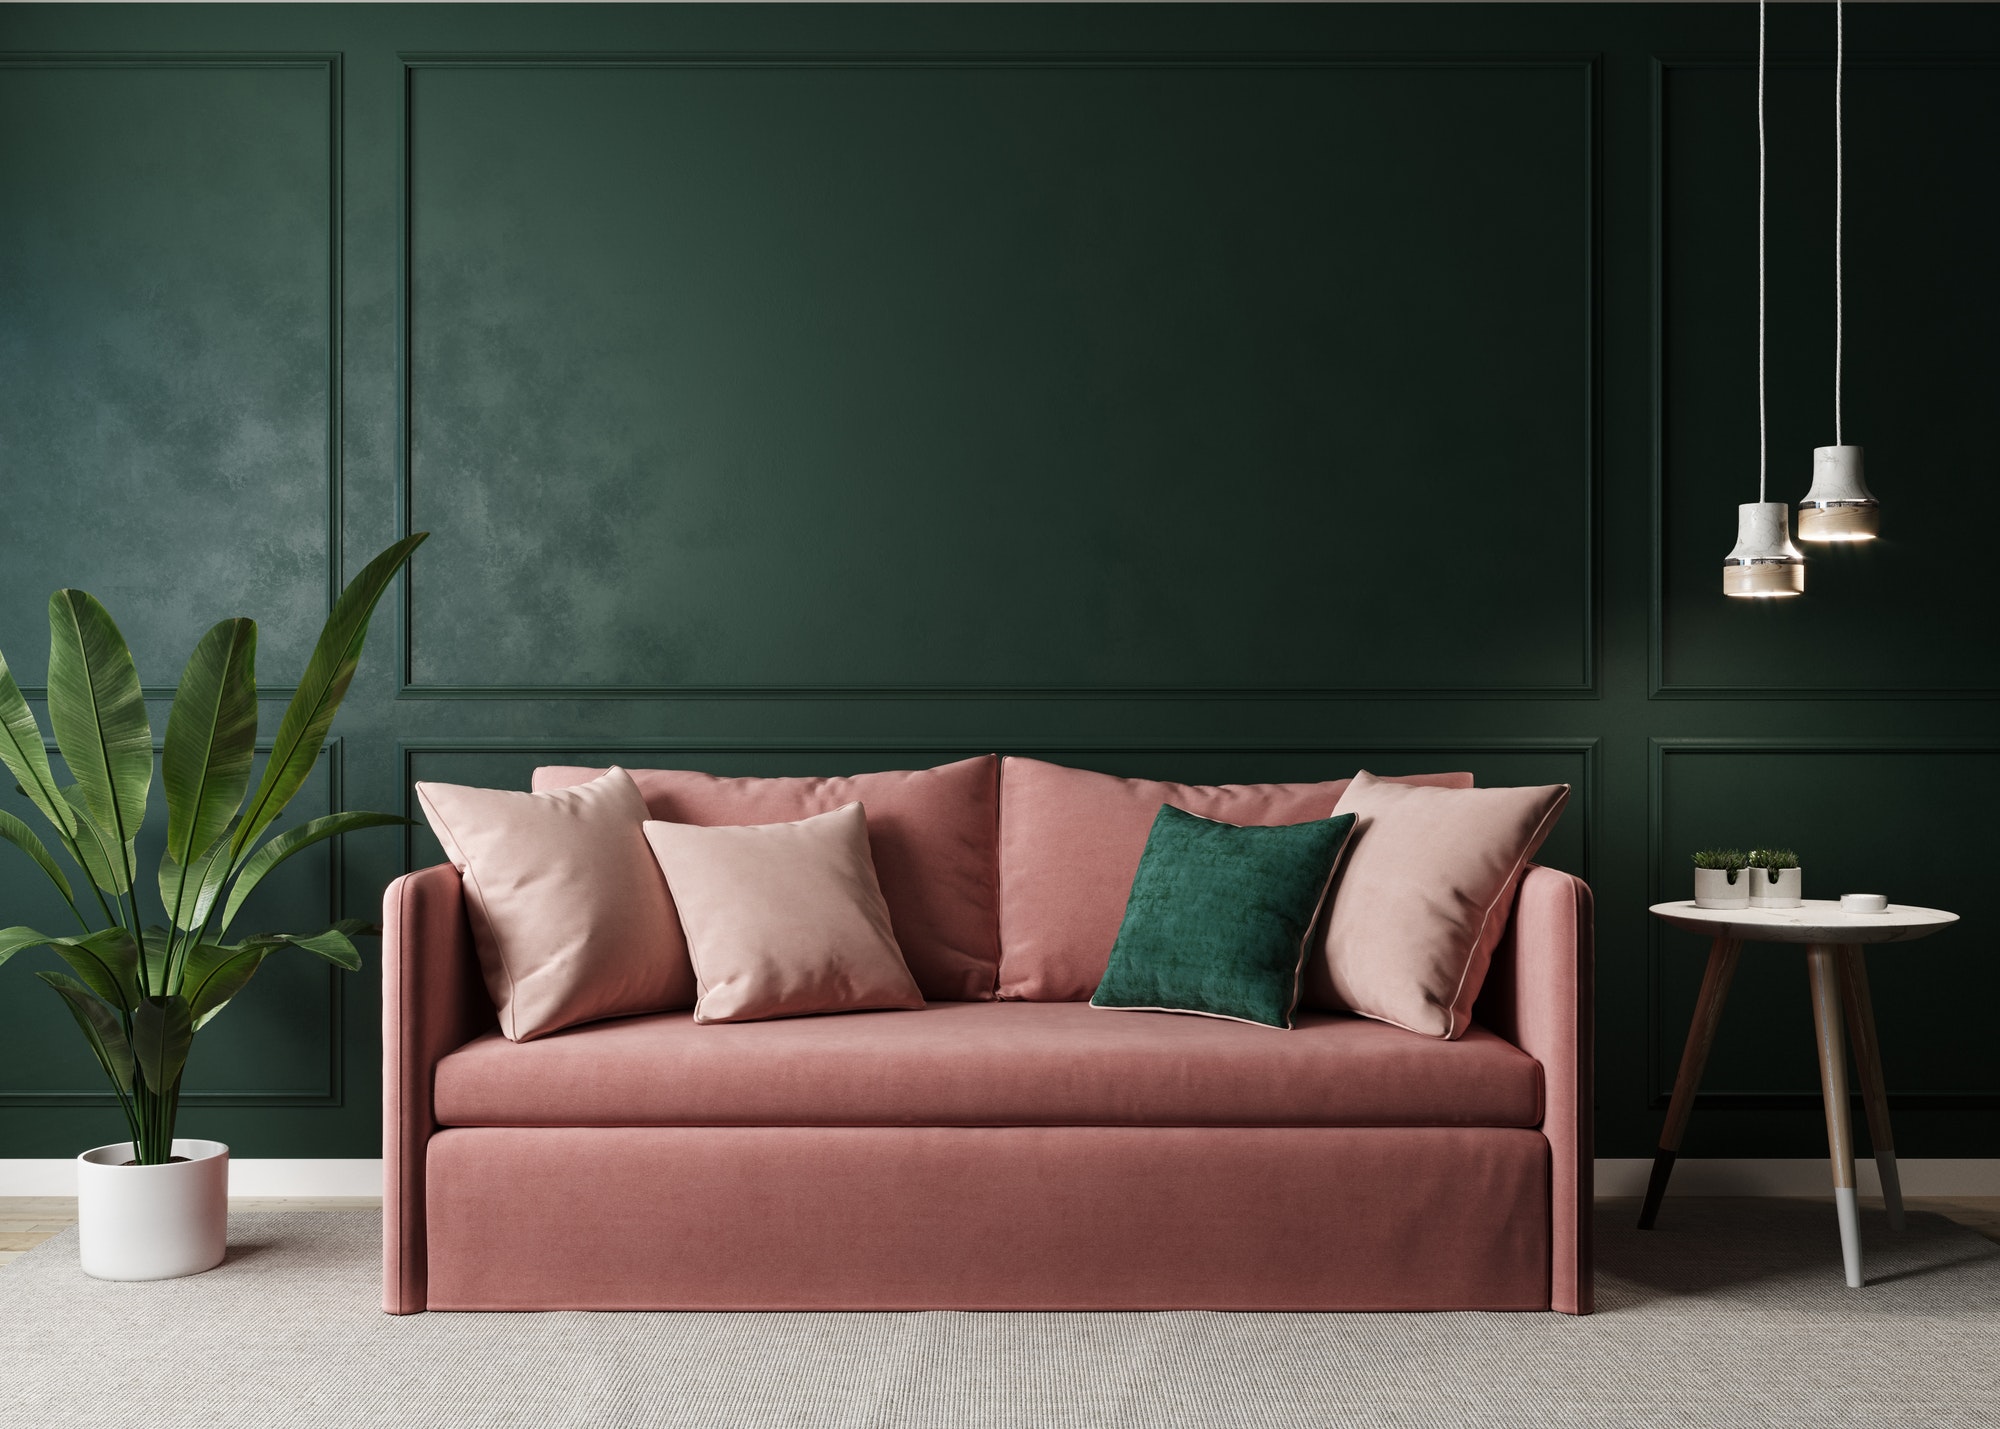 Home interior mock-up with pink sofa, table and decor in green living room, 3d rendering